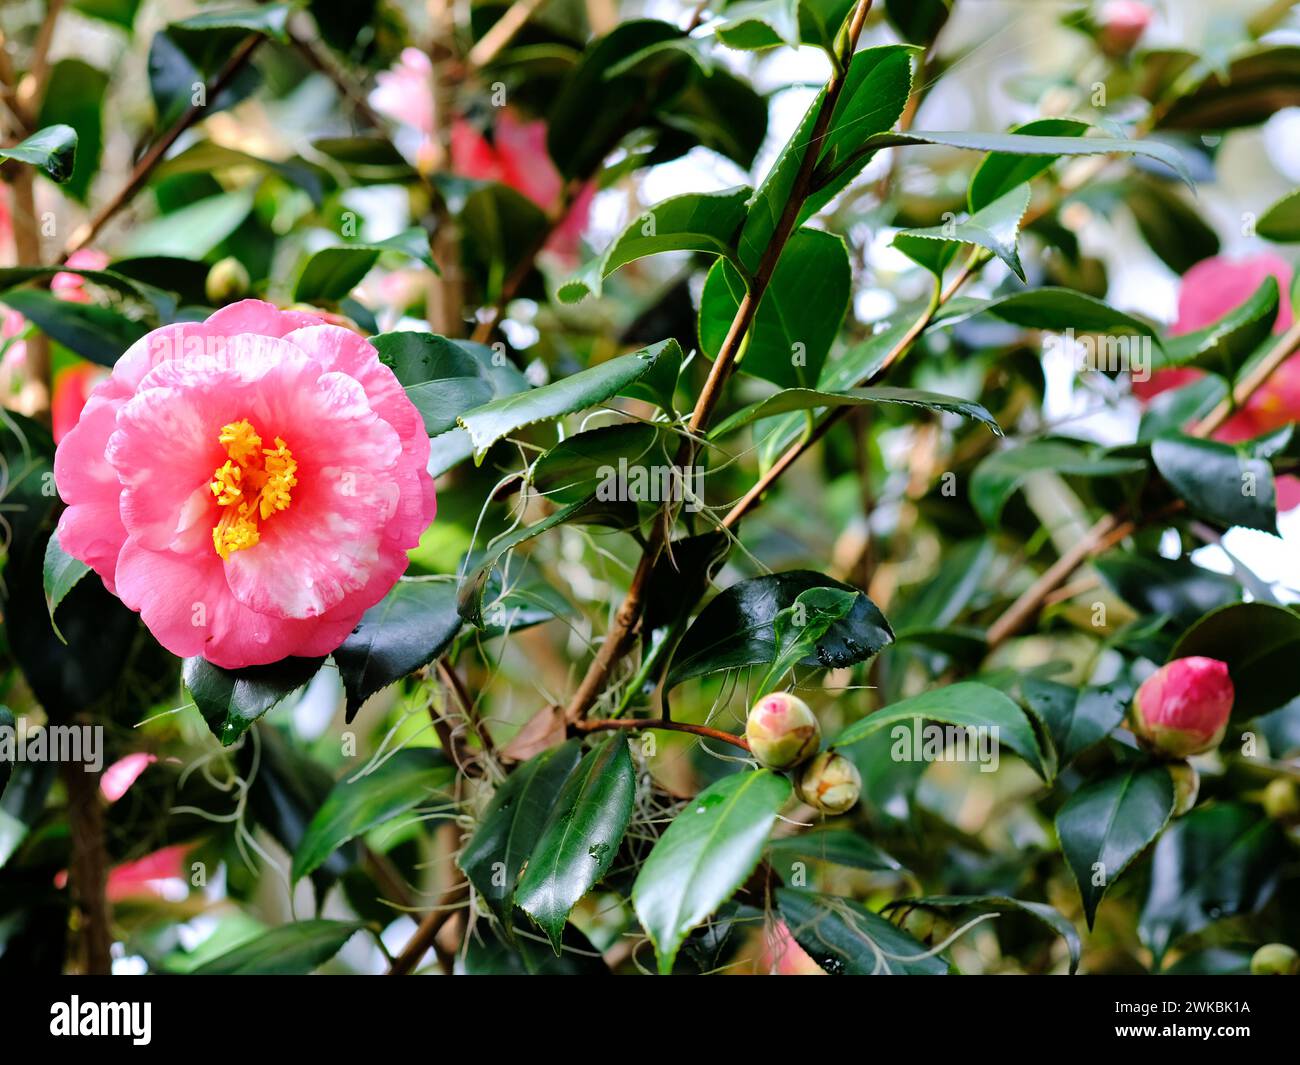 Camellia japonica Faith Variegated variety; pink, rose and white flower petals and yellow stamen surrounded by lush green leaves. Stock Photo